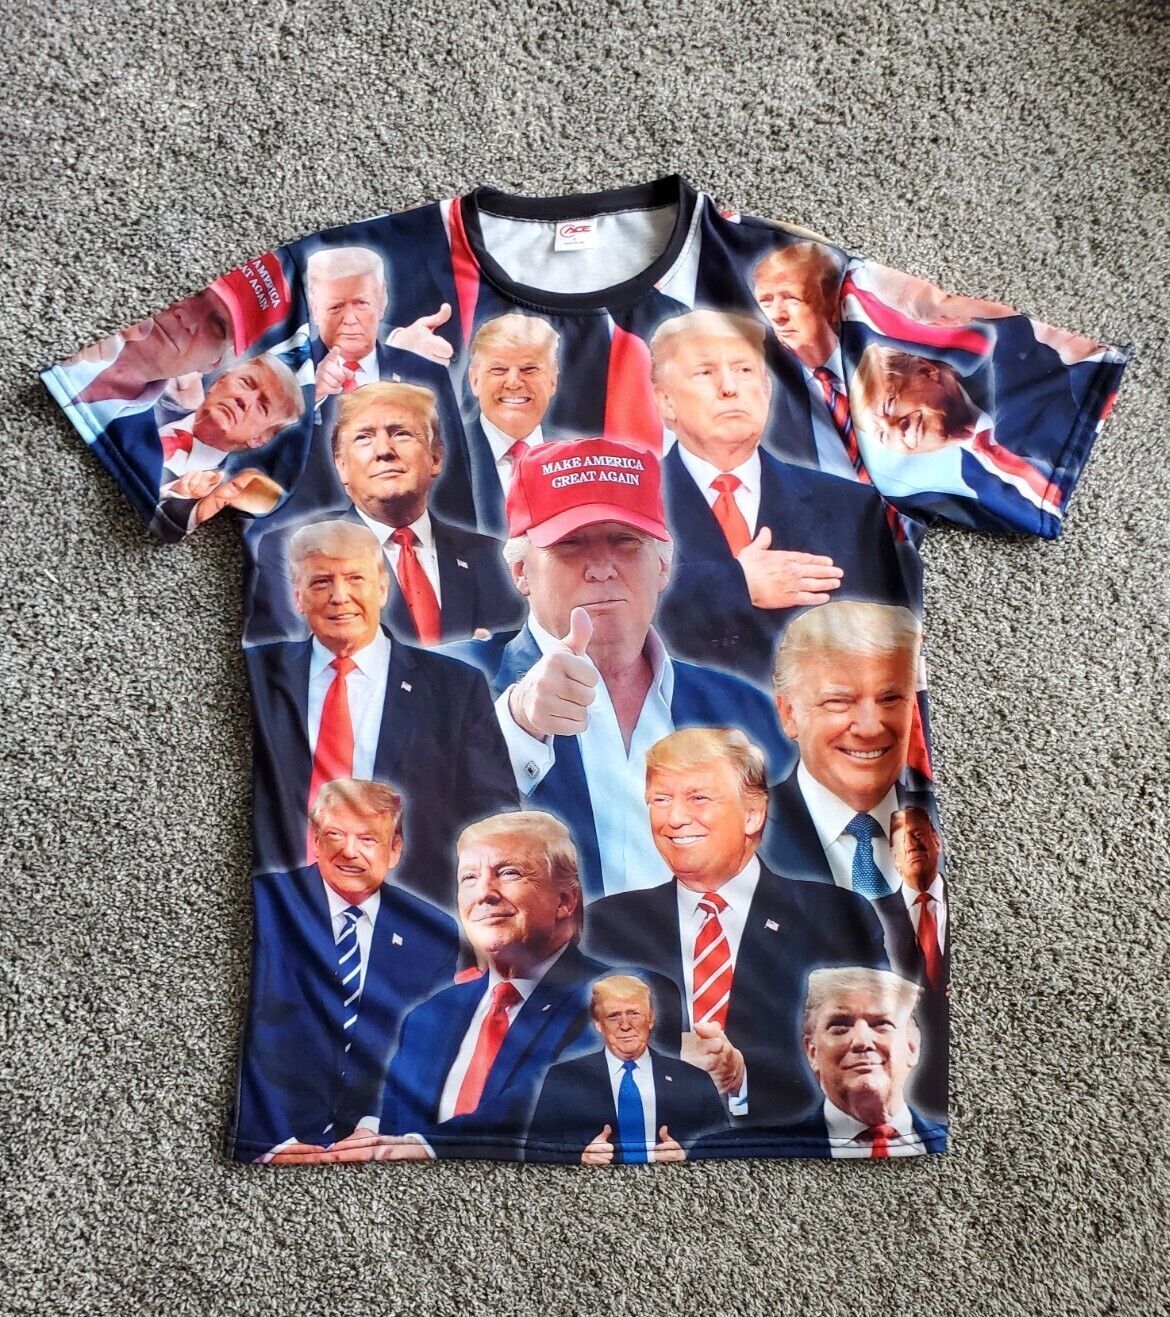 Official Authentic President Trump pictures  Shirt Large. Made in USA